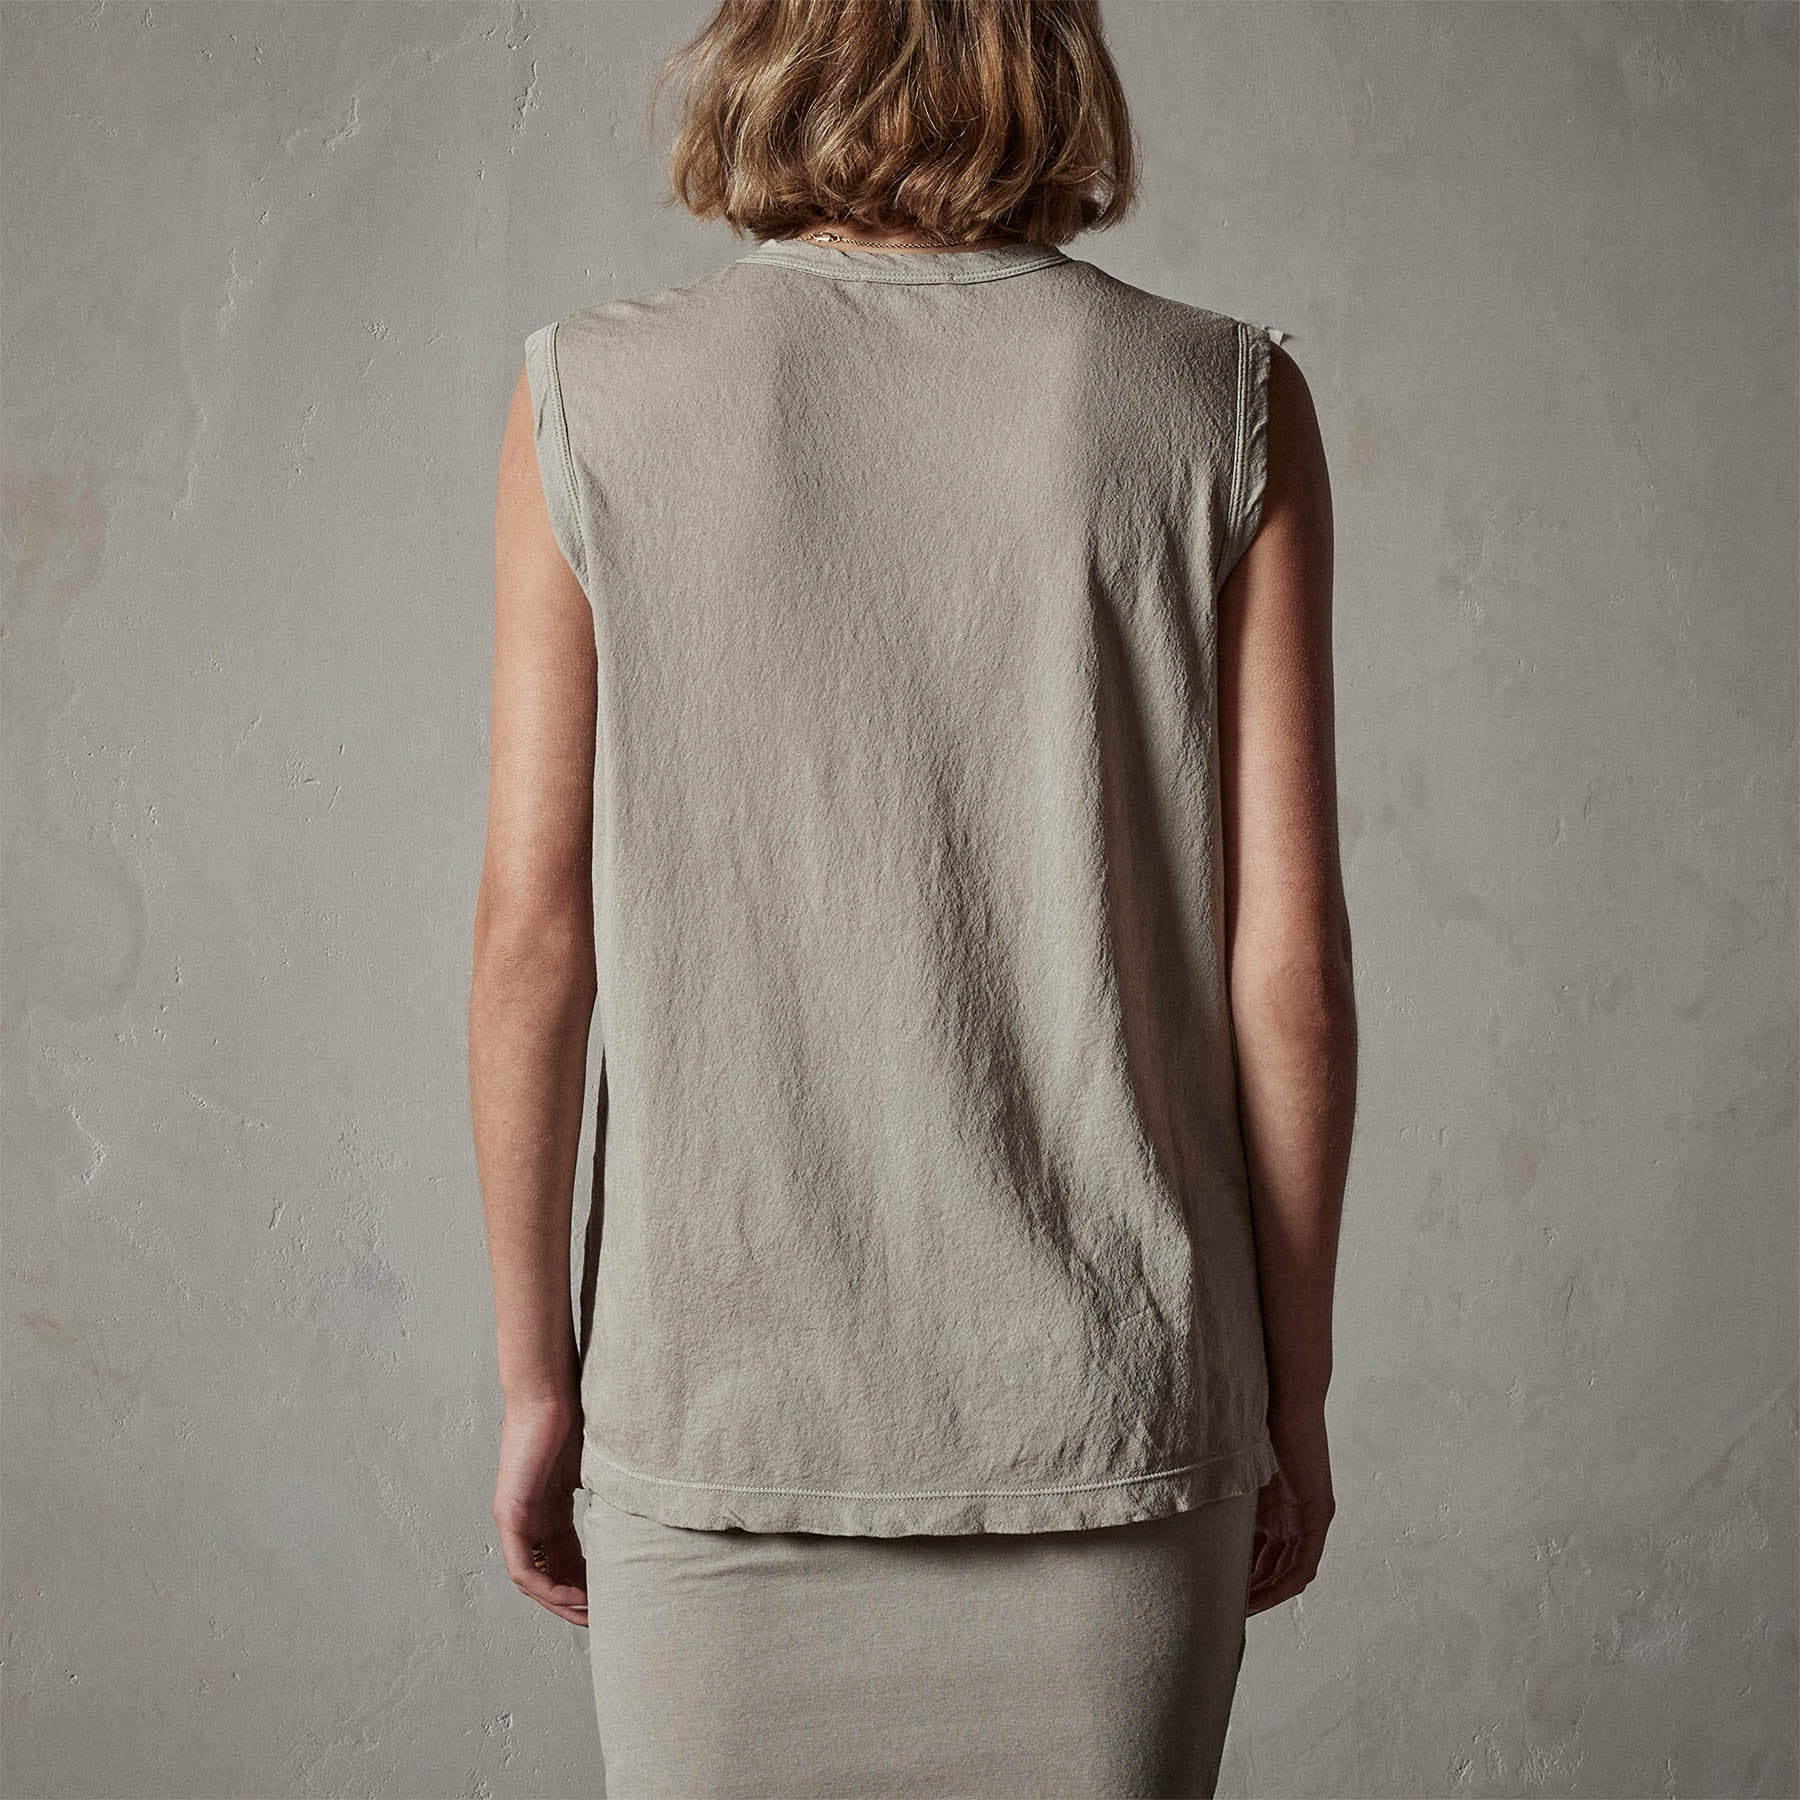 JAMES PERSE Relaxed Fit Jersey Muscle Tank in Stone 0/XS